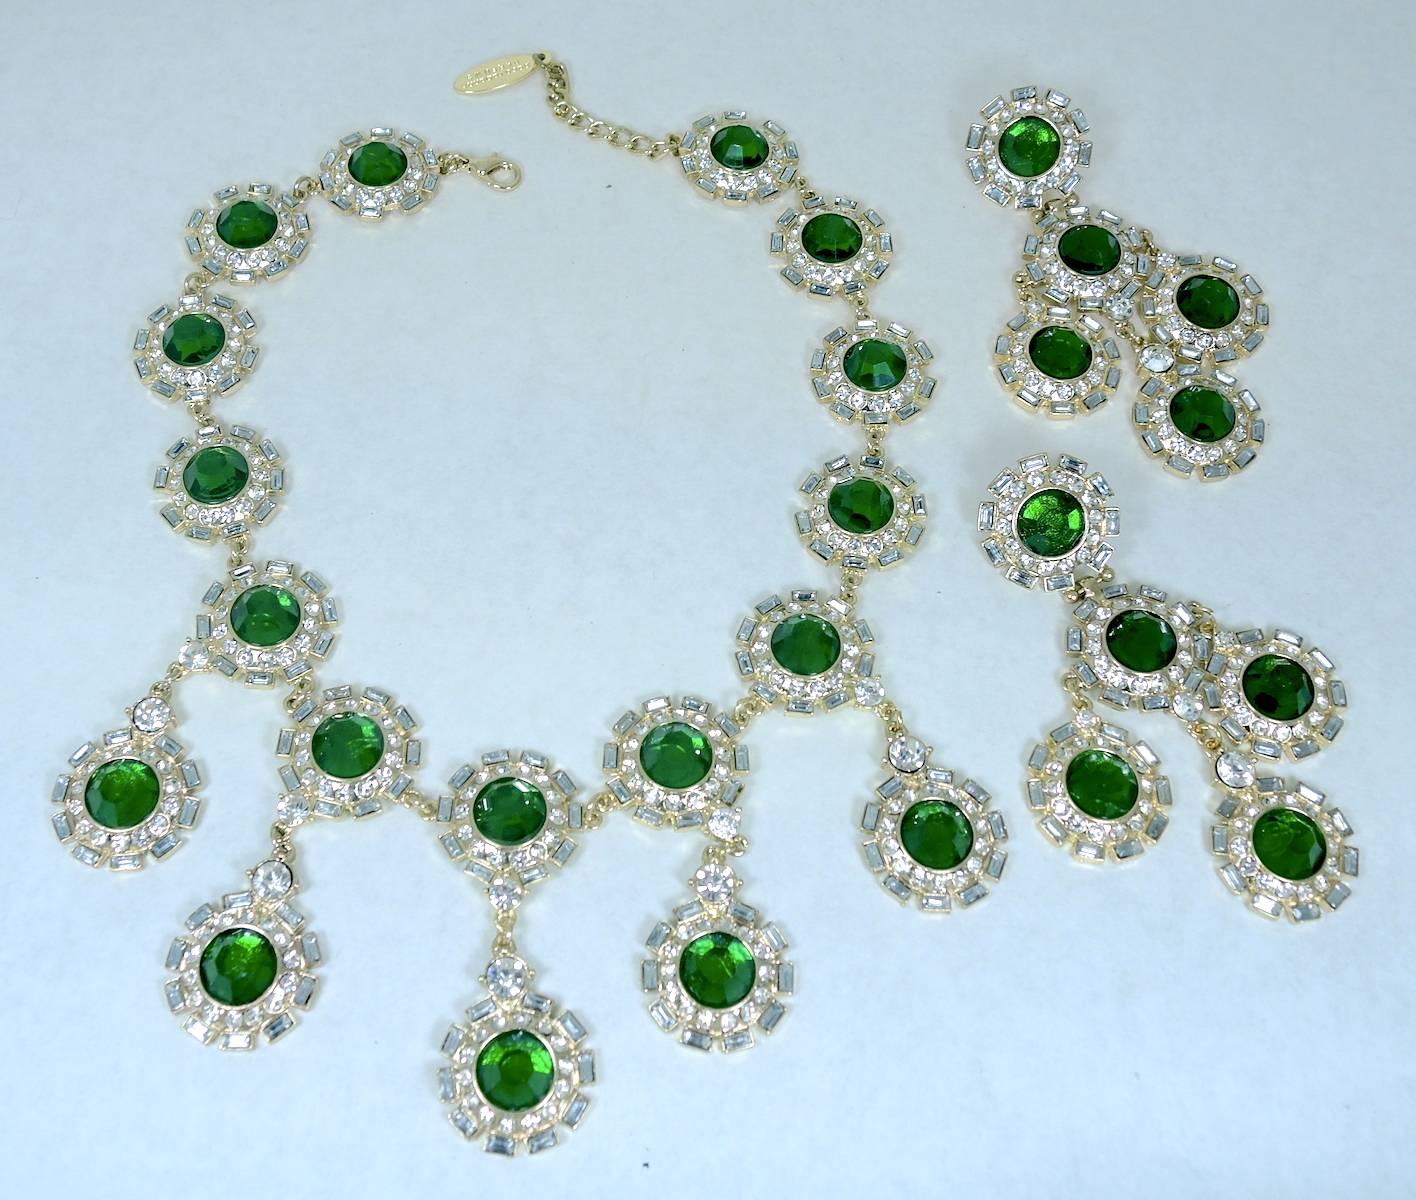 This spectacular runway necklace was made by Paco Rabanne and features a creative design of thirteen alternating round discs with brilliant faux emeralds in the center. They are framed by gorgeous crystal accents. The disks have a look like